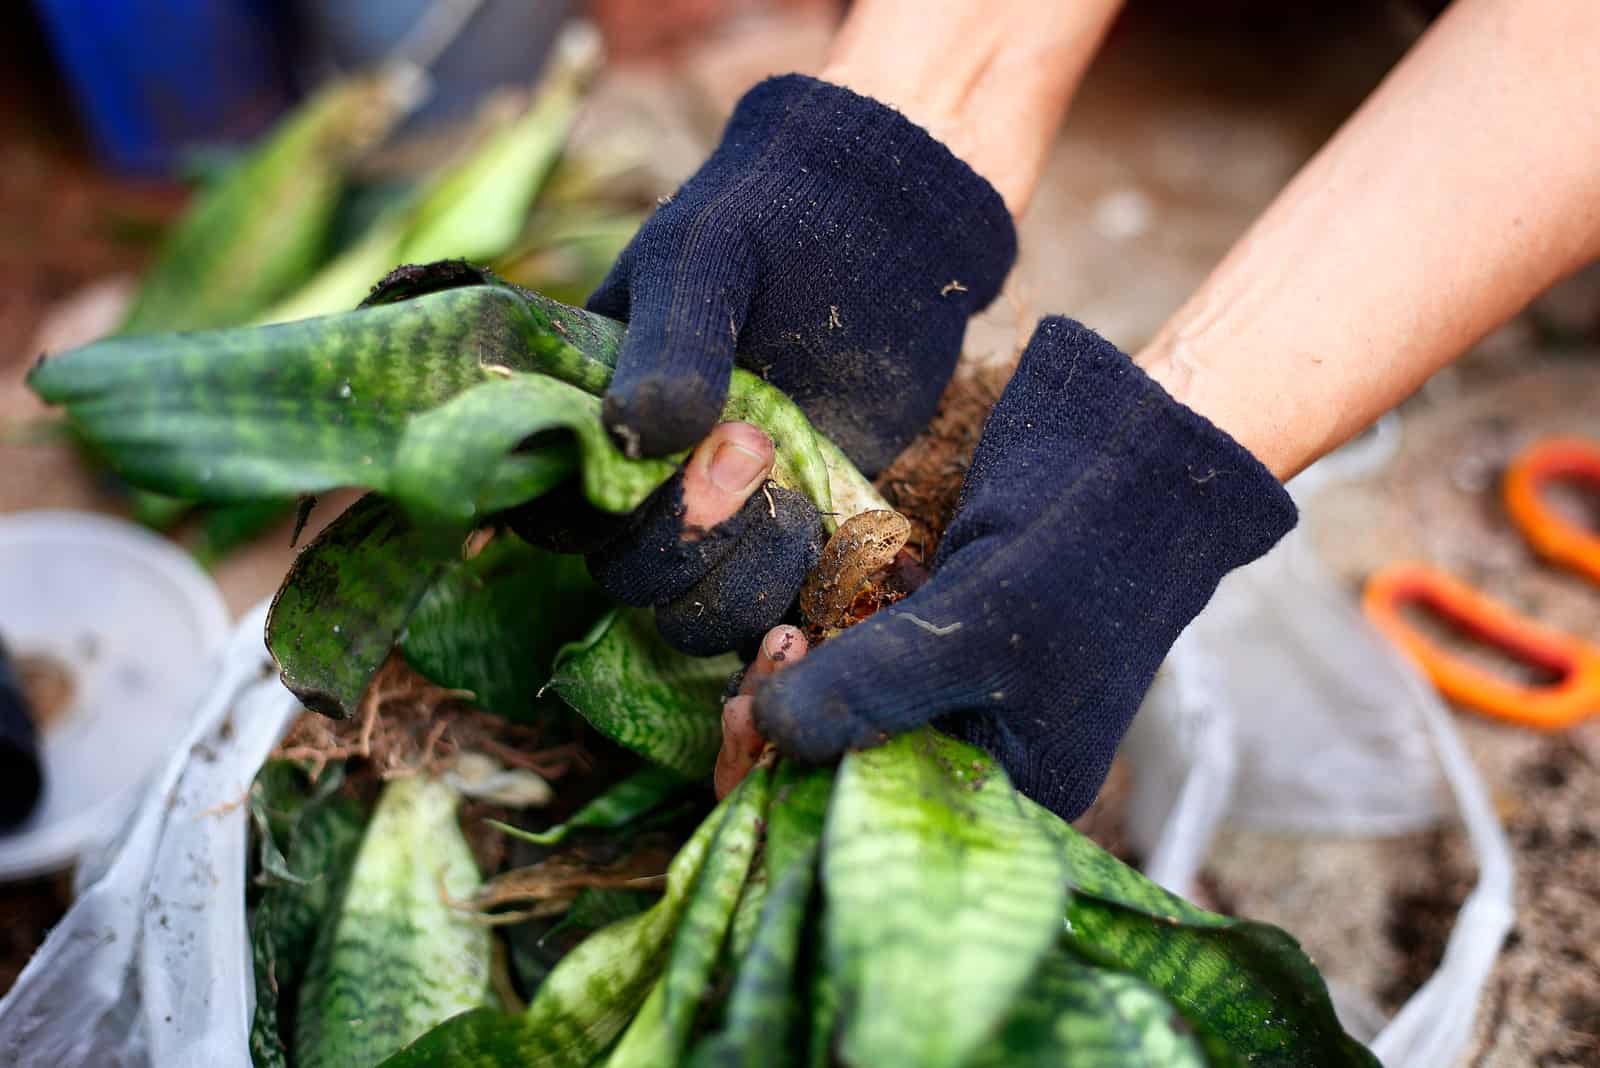 Snake plants in garden were divided by woman hands in glove